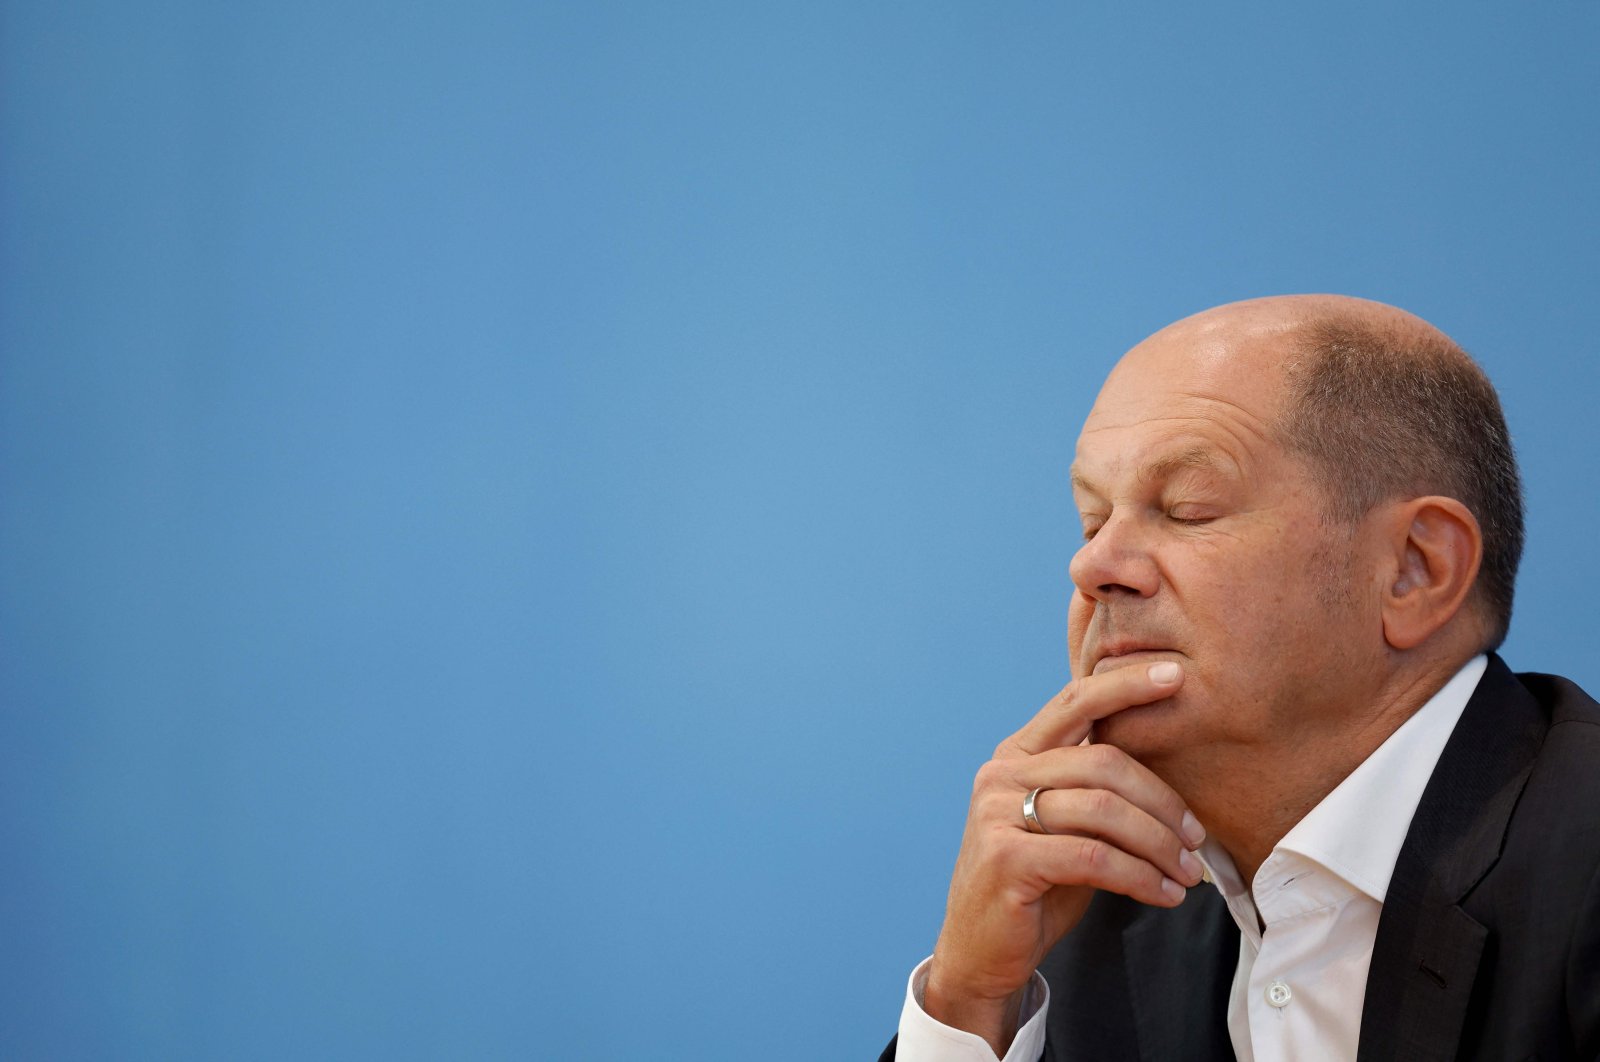 German Chancellor Olaf Scholz briefly closes his eyes as he addresses a press conference on current domestic and foreign policy issues, Berlin, Germany, Aug. 11, 2022  (AFP File Photo)